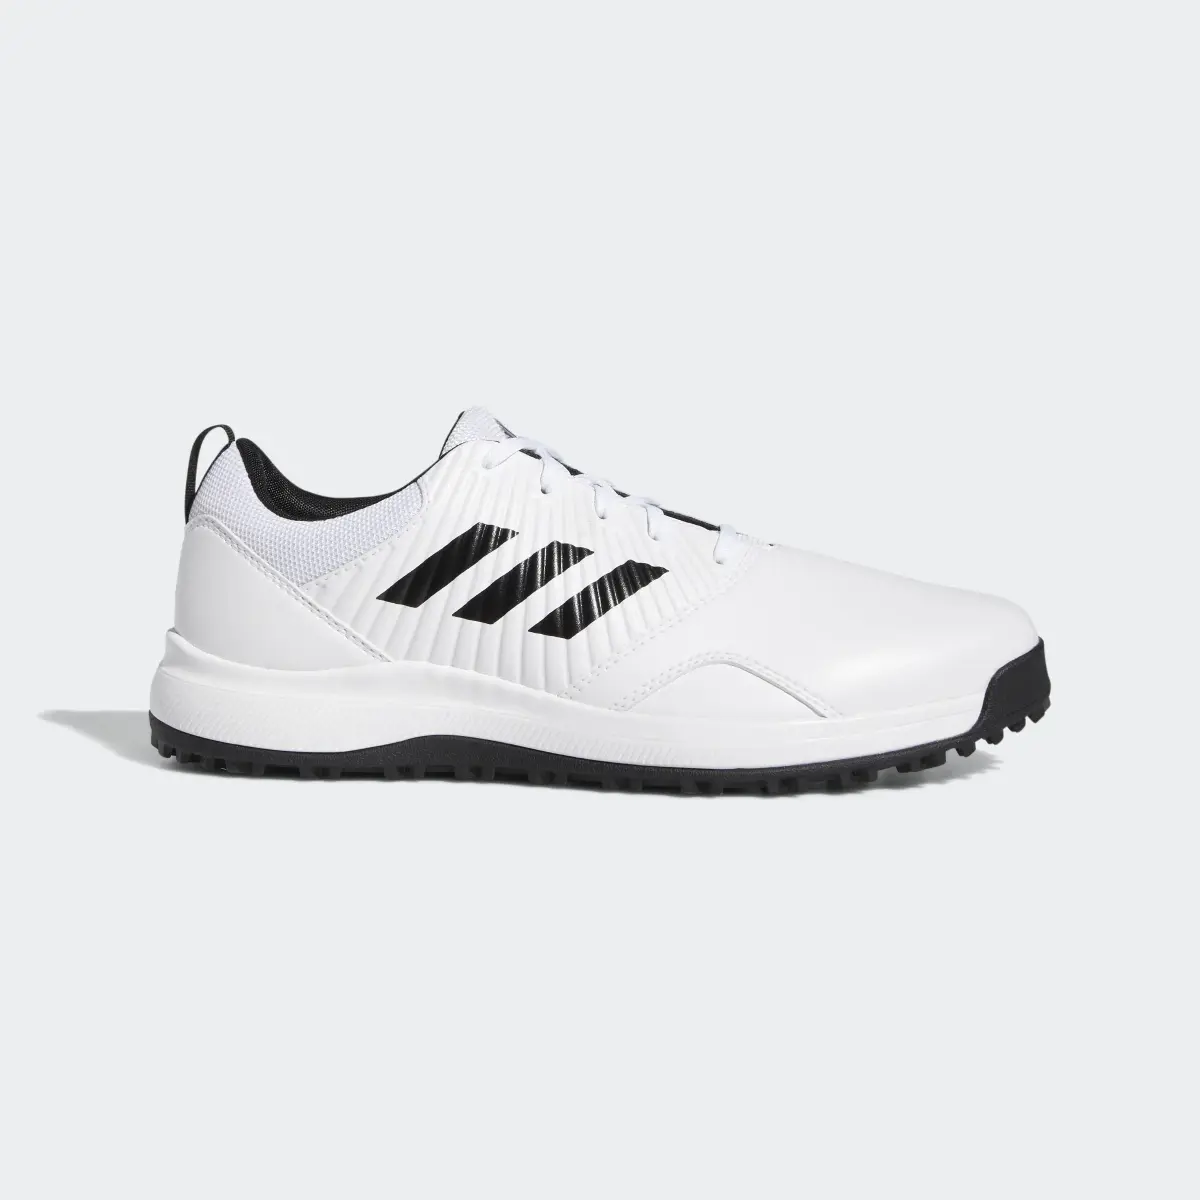 Adidas CP Traxion Spikeless Golf Shoes. 2